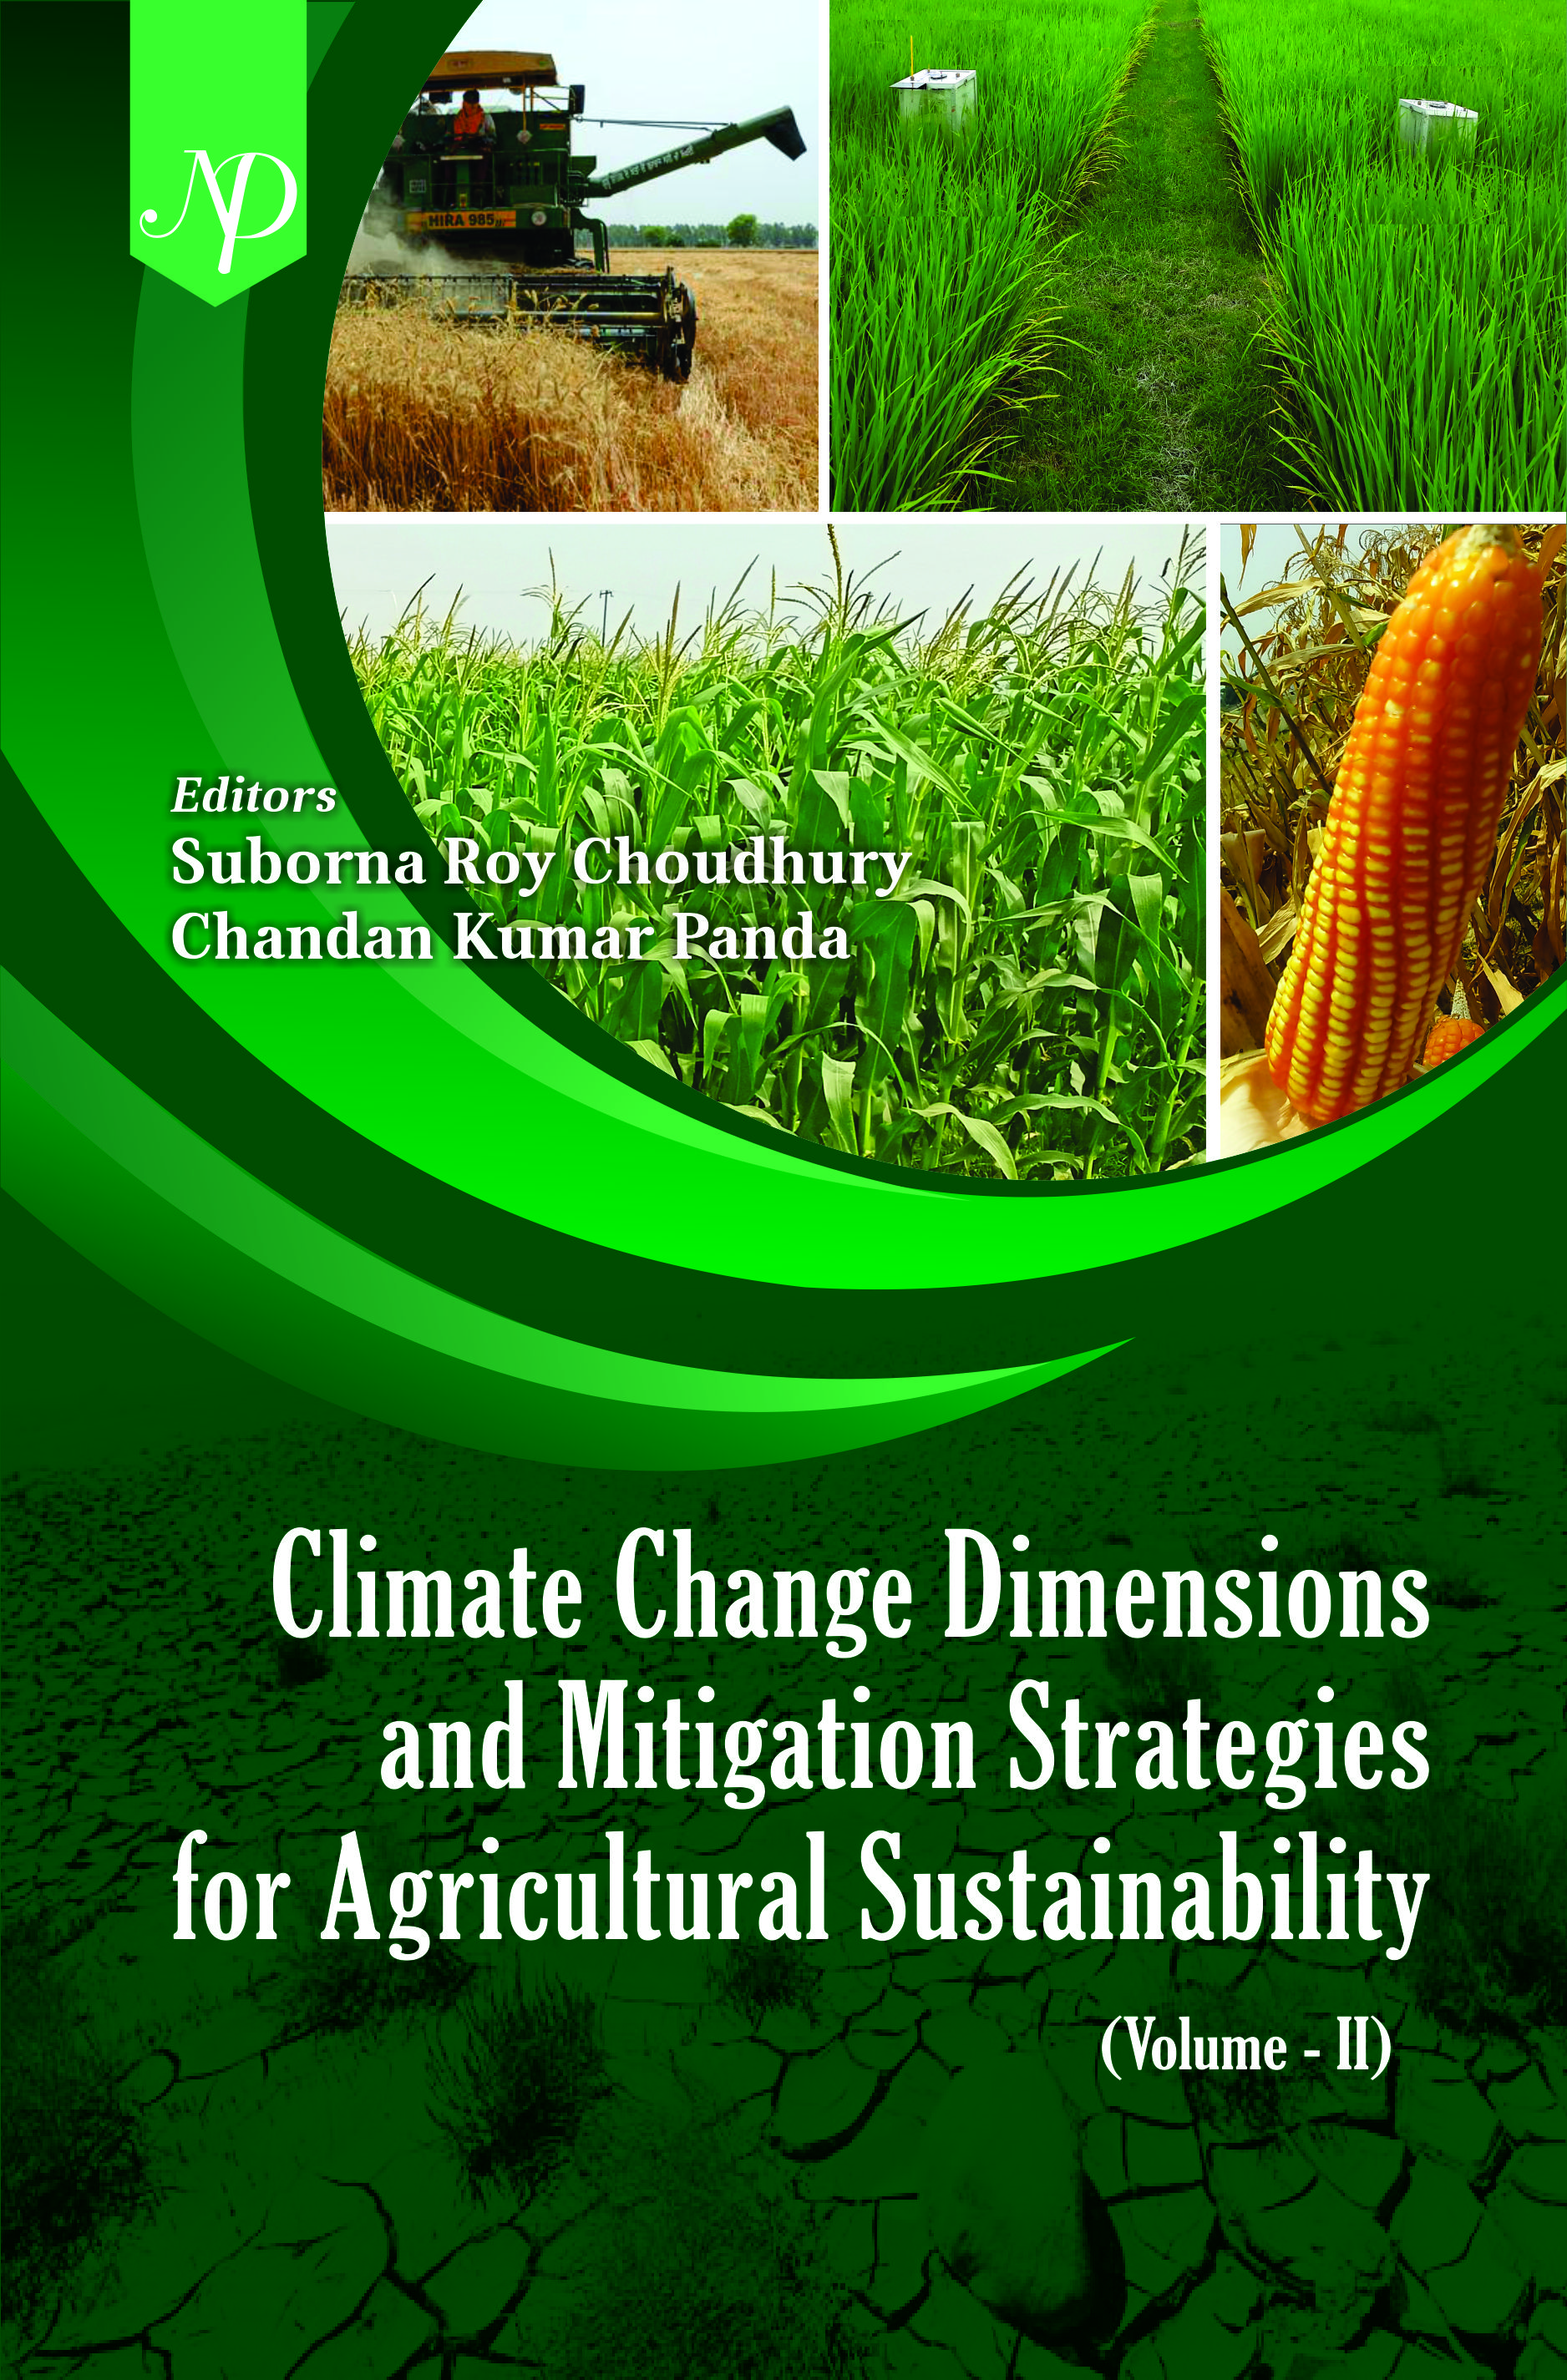 Climate Change Dimensions and Mitigation Strategies for Agricultural Sustainability Vol 2